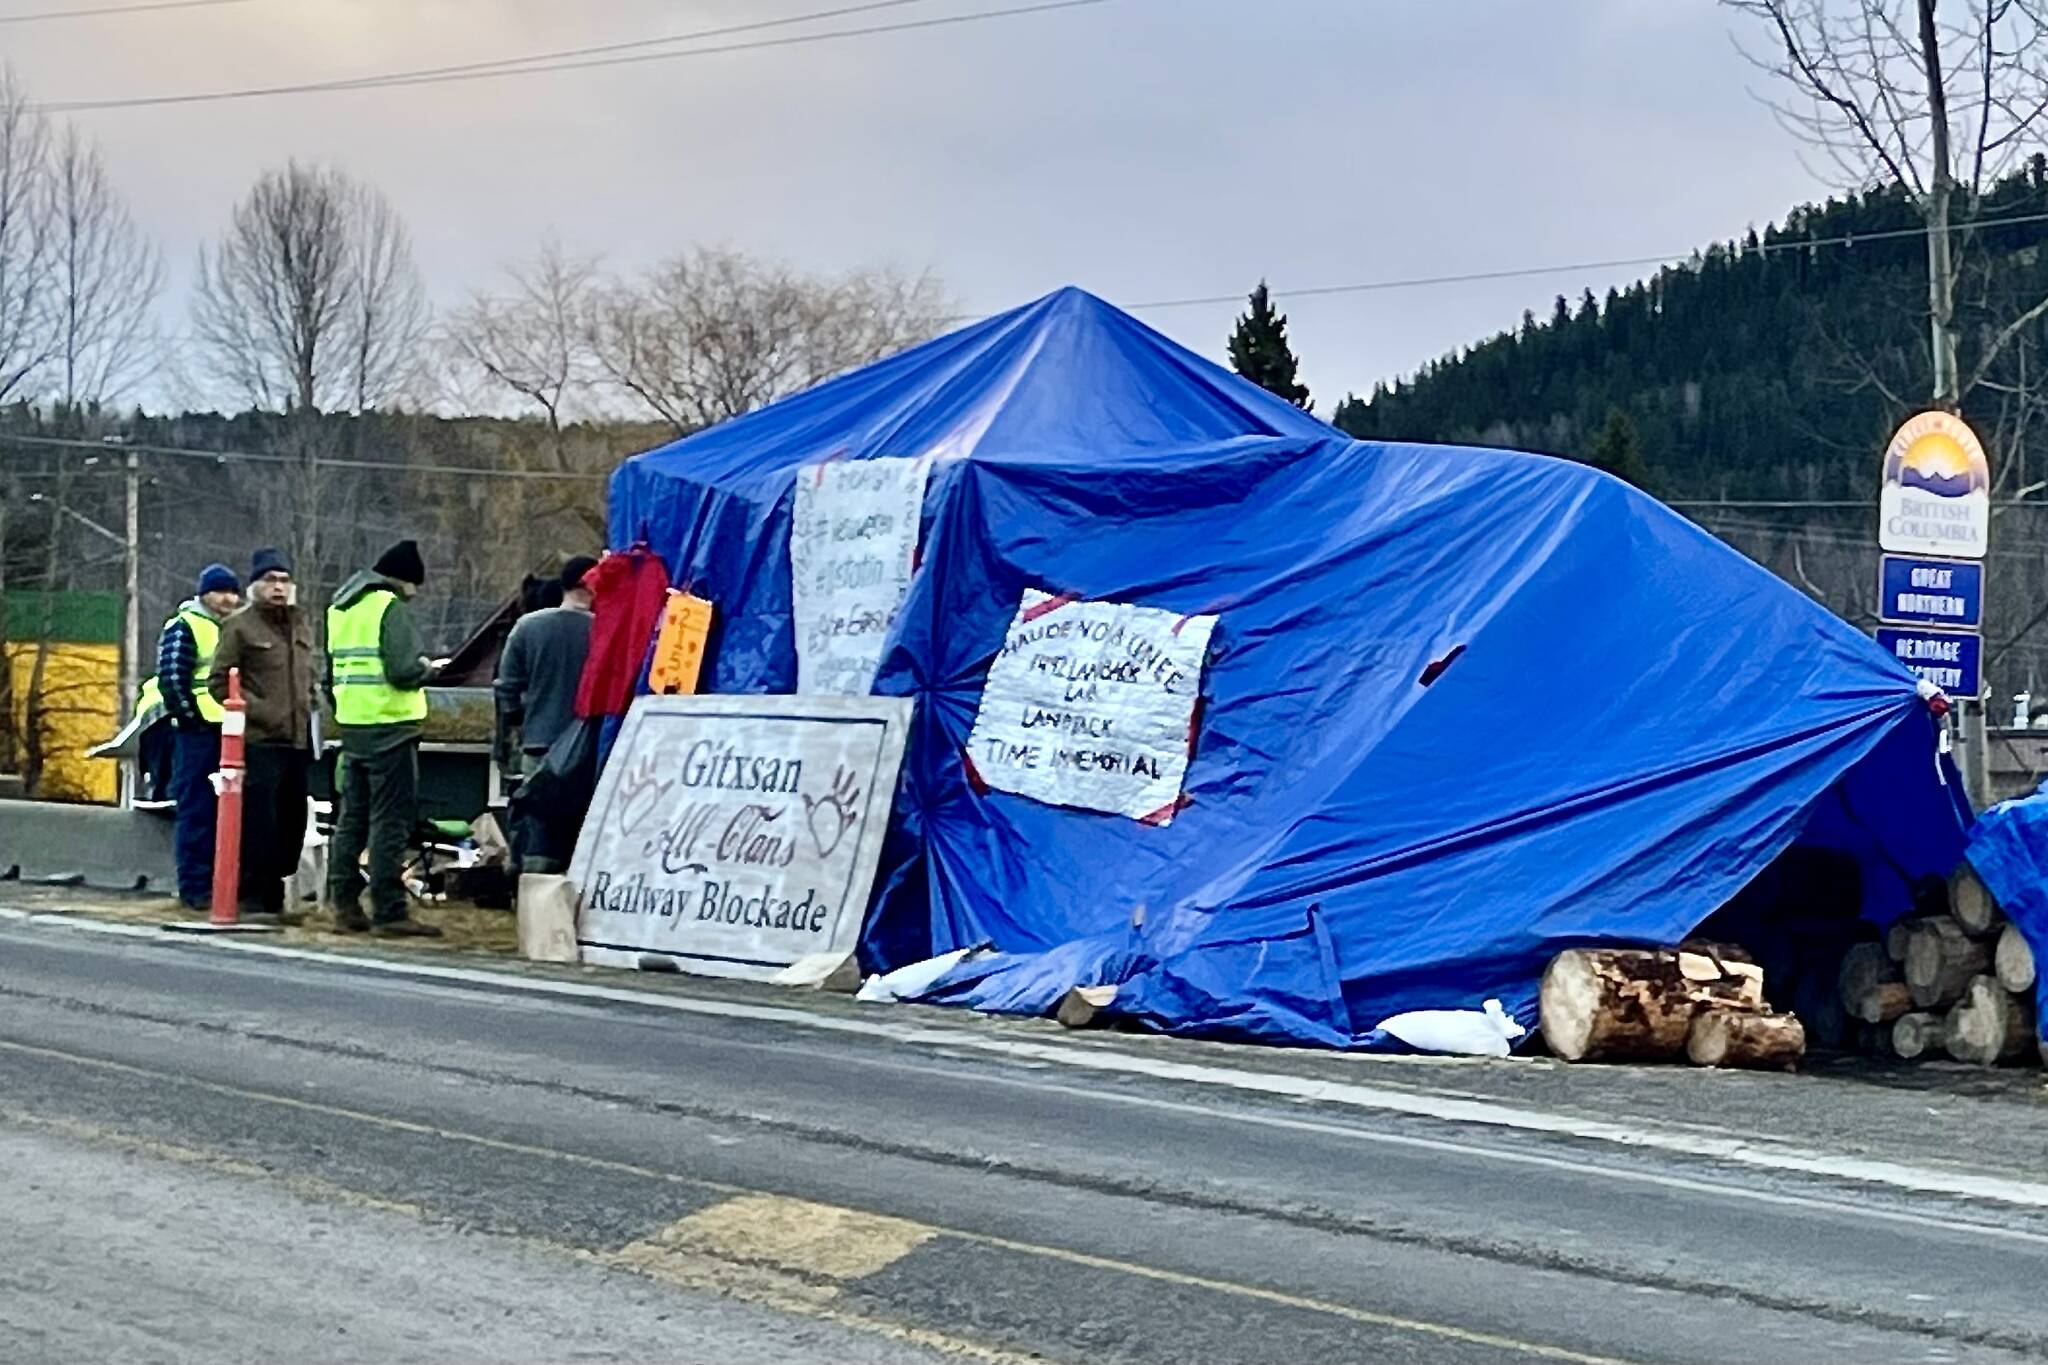 An encampment on Hwy 16 in New Hazelton near the CN Rail tracks was set up in solidarity with Coastal GasLink pipeline opponents following arrests made at the company’s worksite near Houston. Two men were arrested near the camp triggering a request by Stikine MLA Nathan Cullen to review police actions. (Deb Meissner photo)